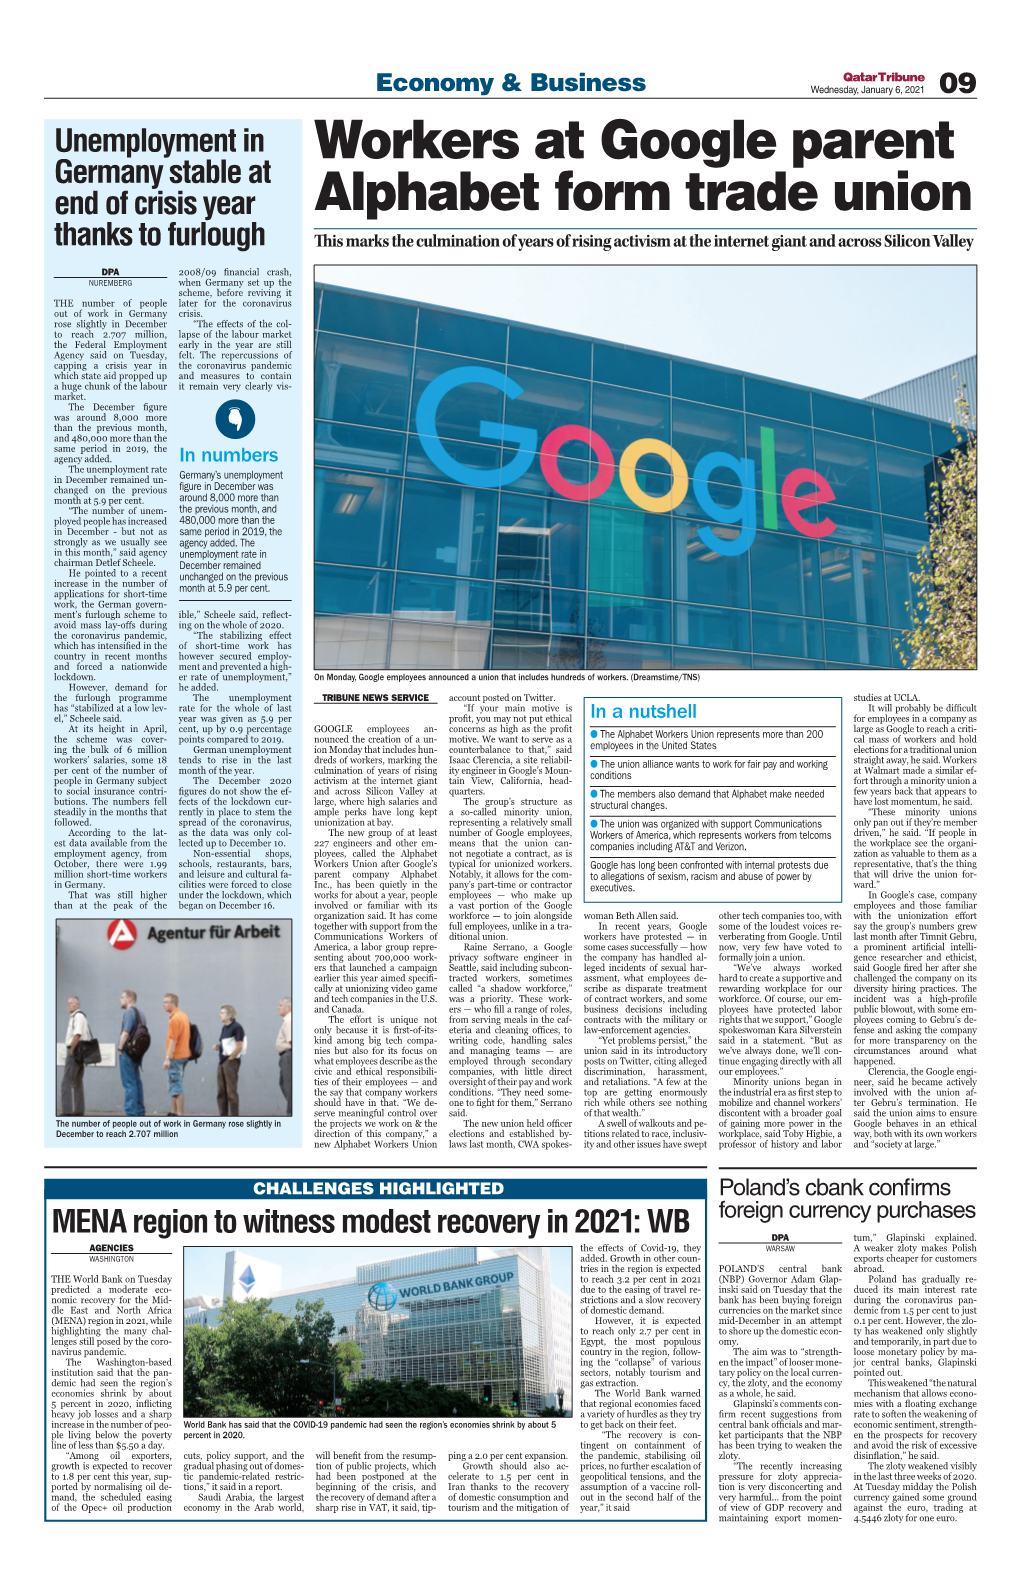 Workers at Google Parent Alphabet Form Trade Union